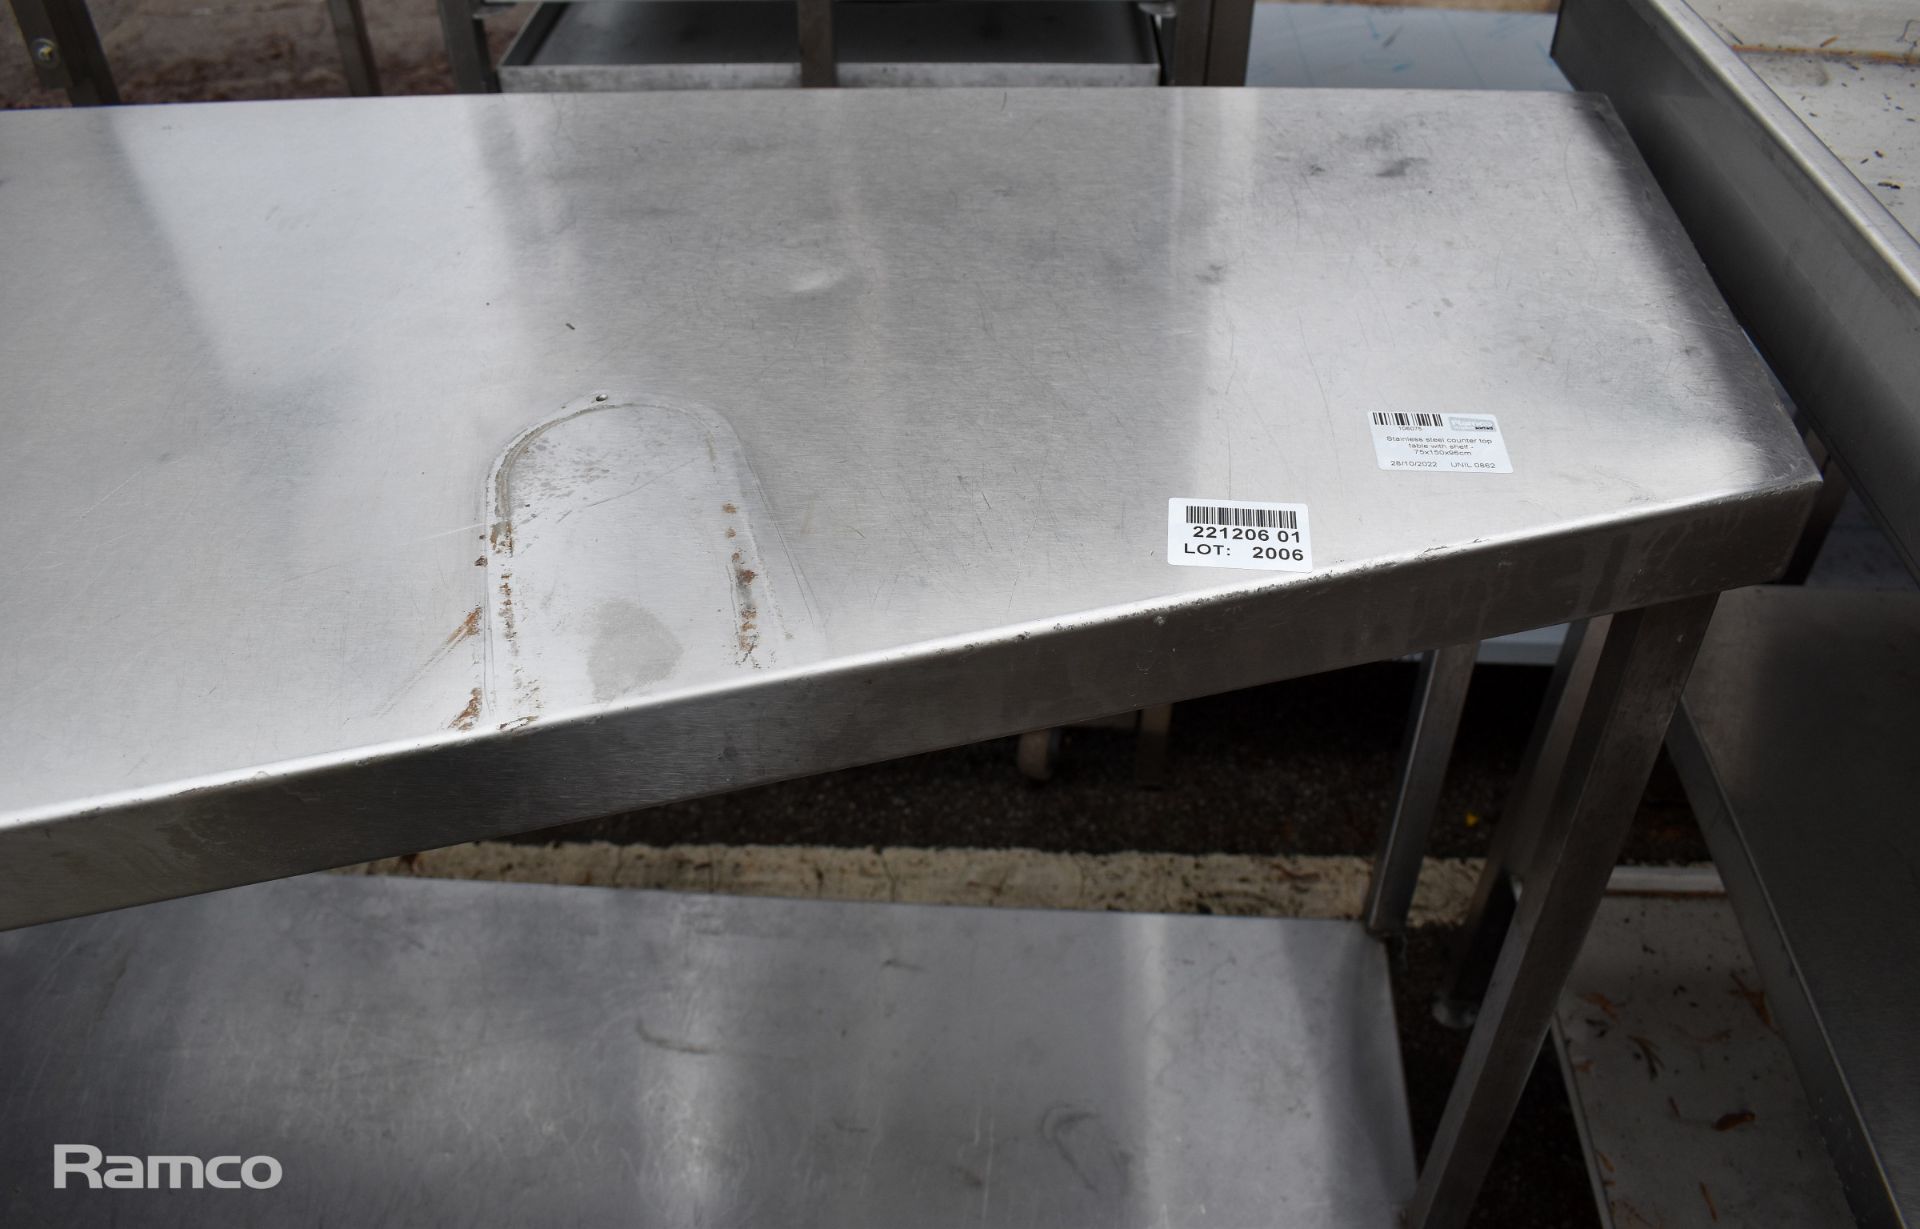 Stainless steel counter top table with shelf - 75 x 150 x 96cm - Image 3 of 3